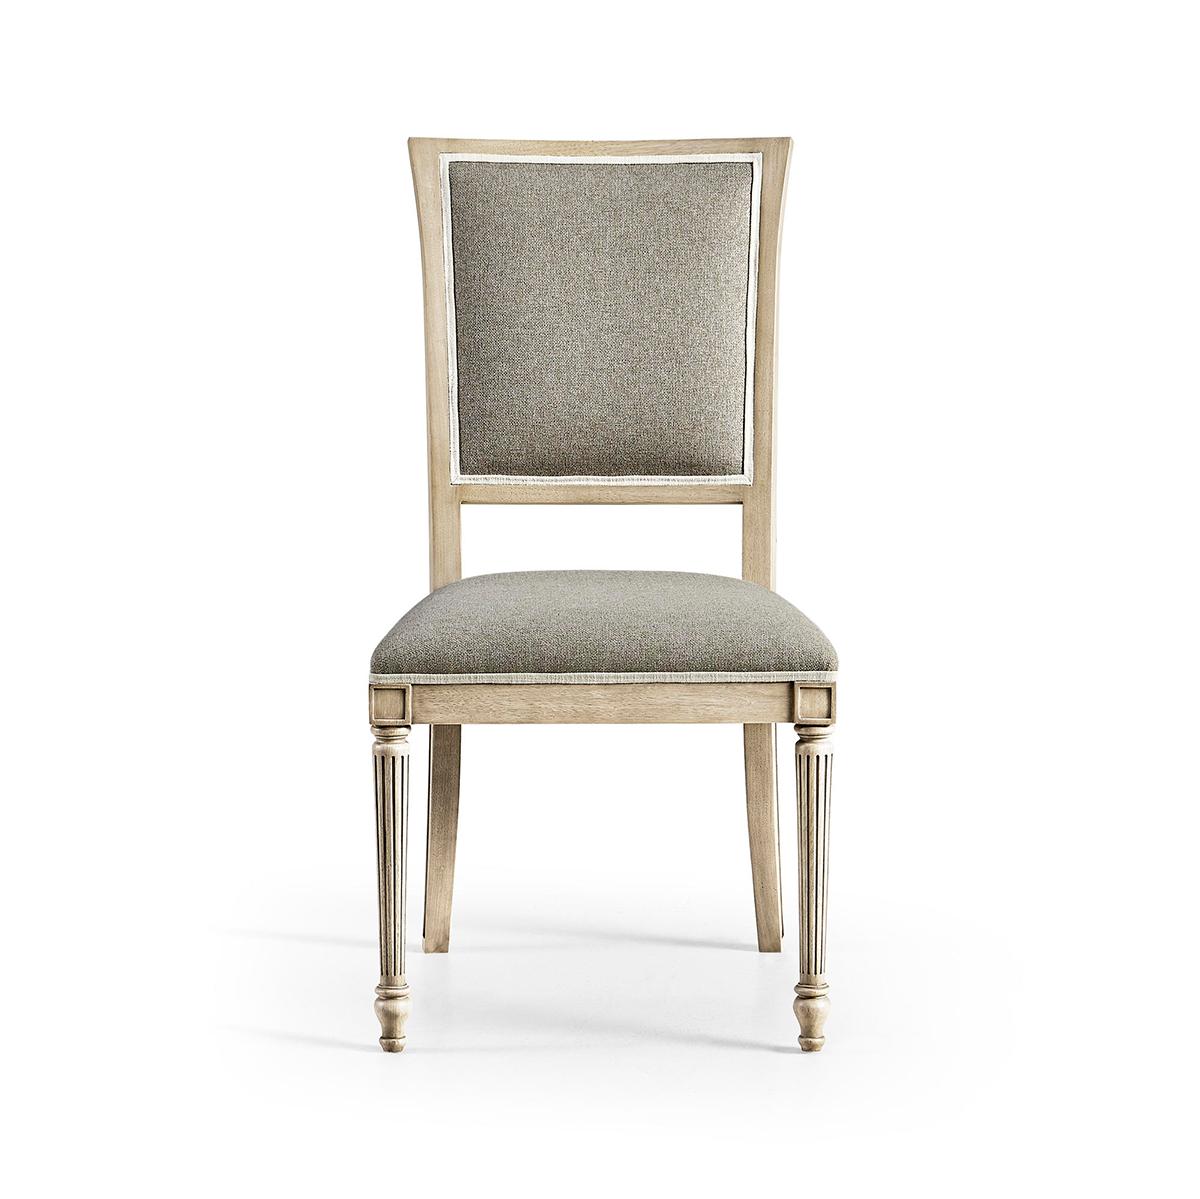 Crafted with meticulous attention to detail, this chair features a sophisticated London Mist wood finish and graceful front turned, tapered and fluted legs, adding a touch of European flair to any dining room.

The hand-upholstered plush,